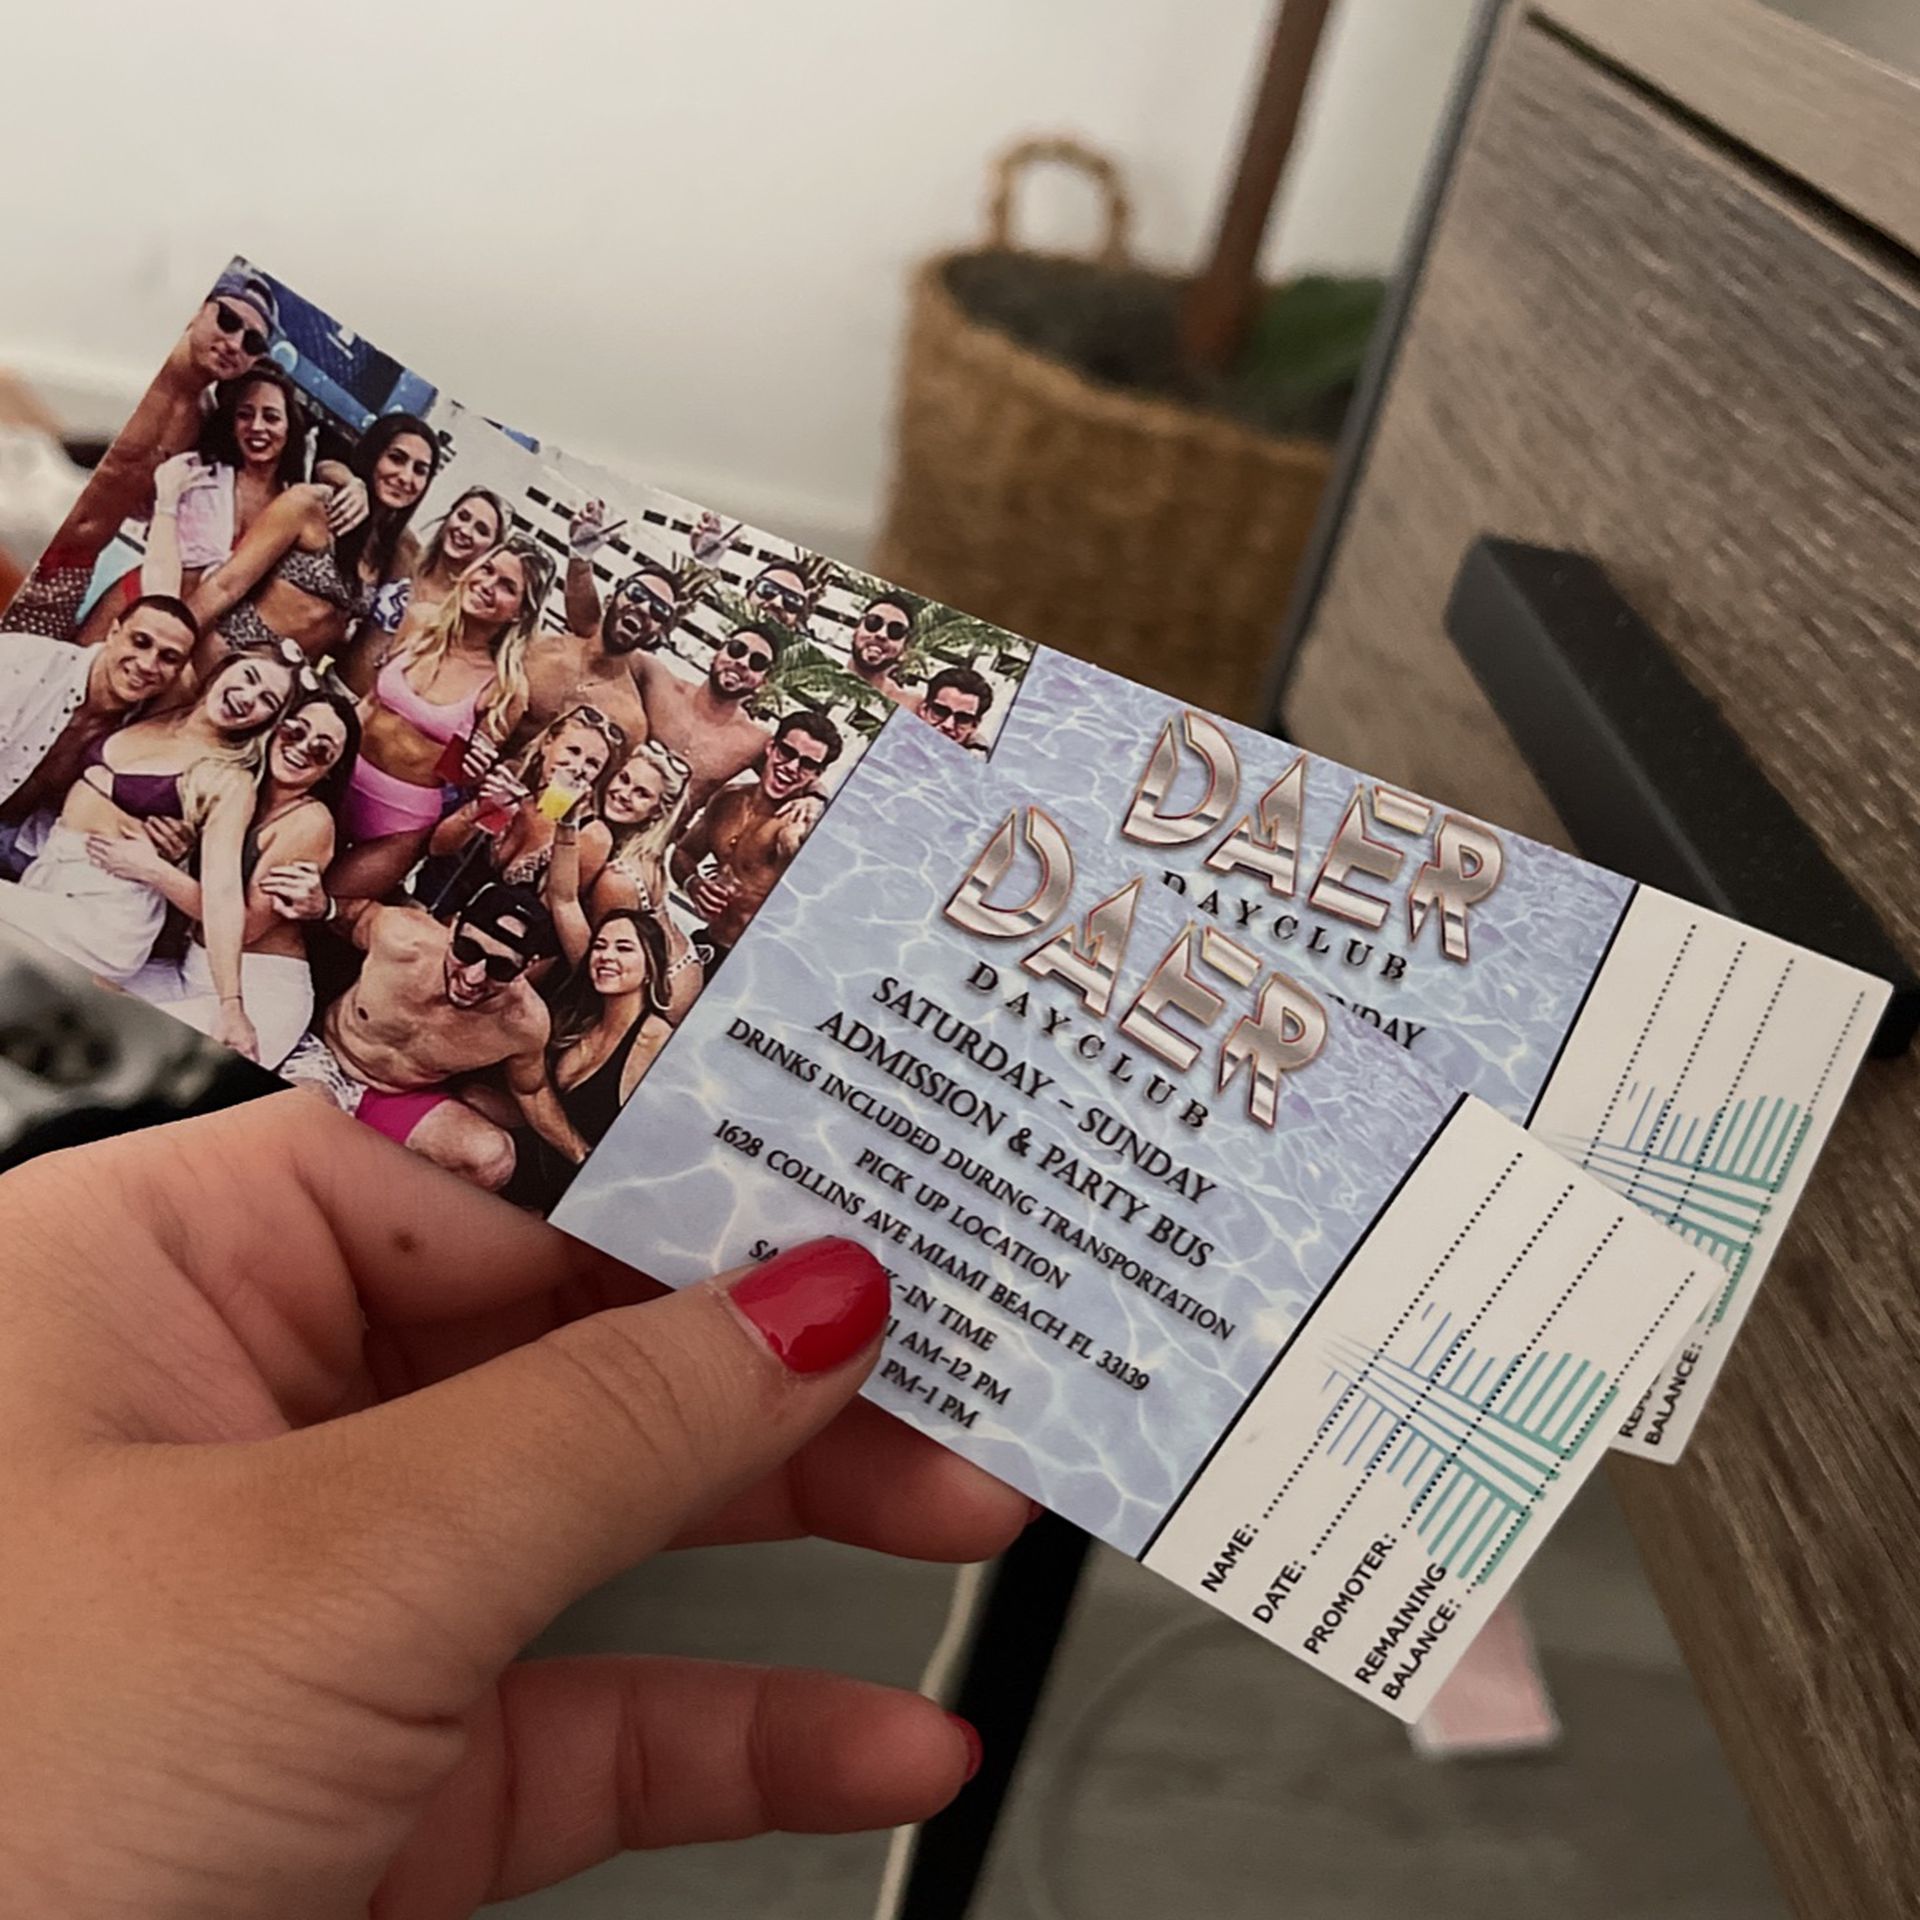 Two (2) DAER Day Club Tickets